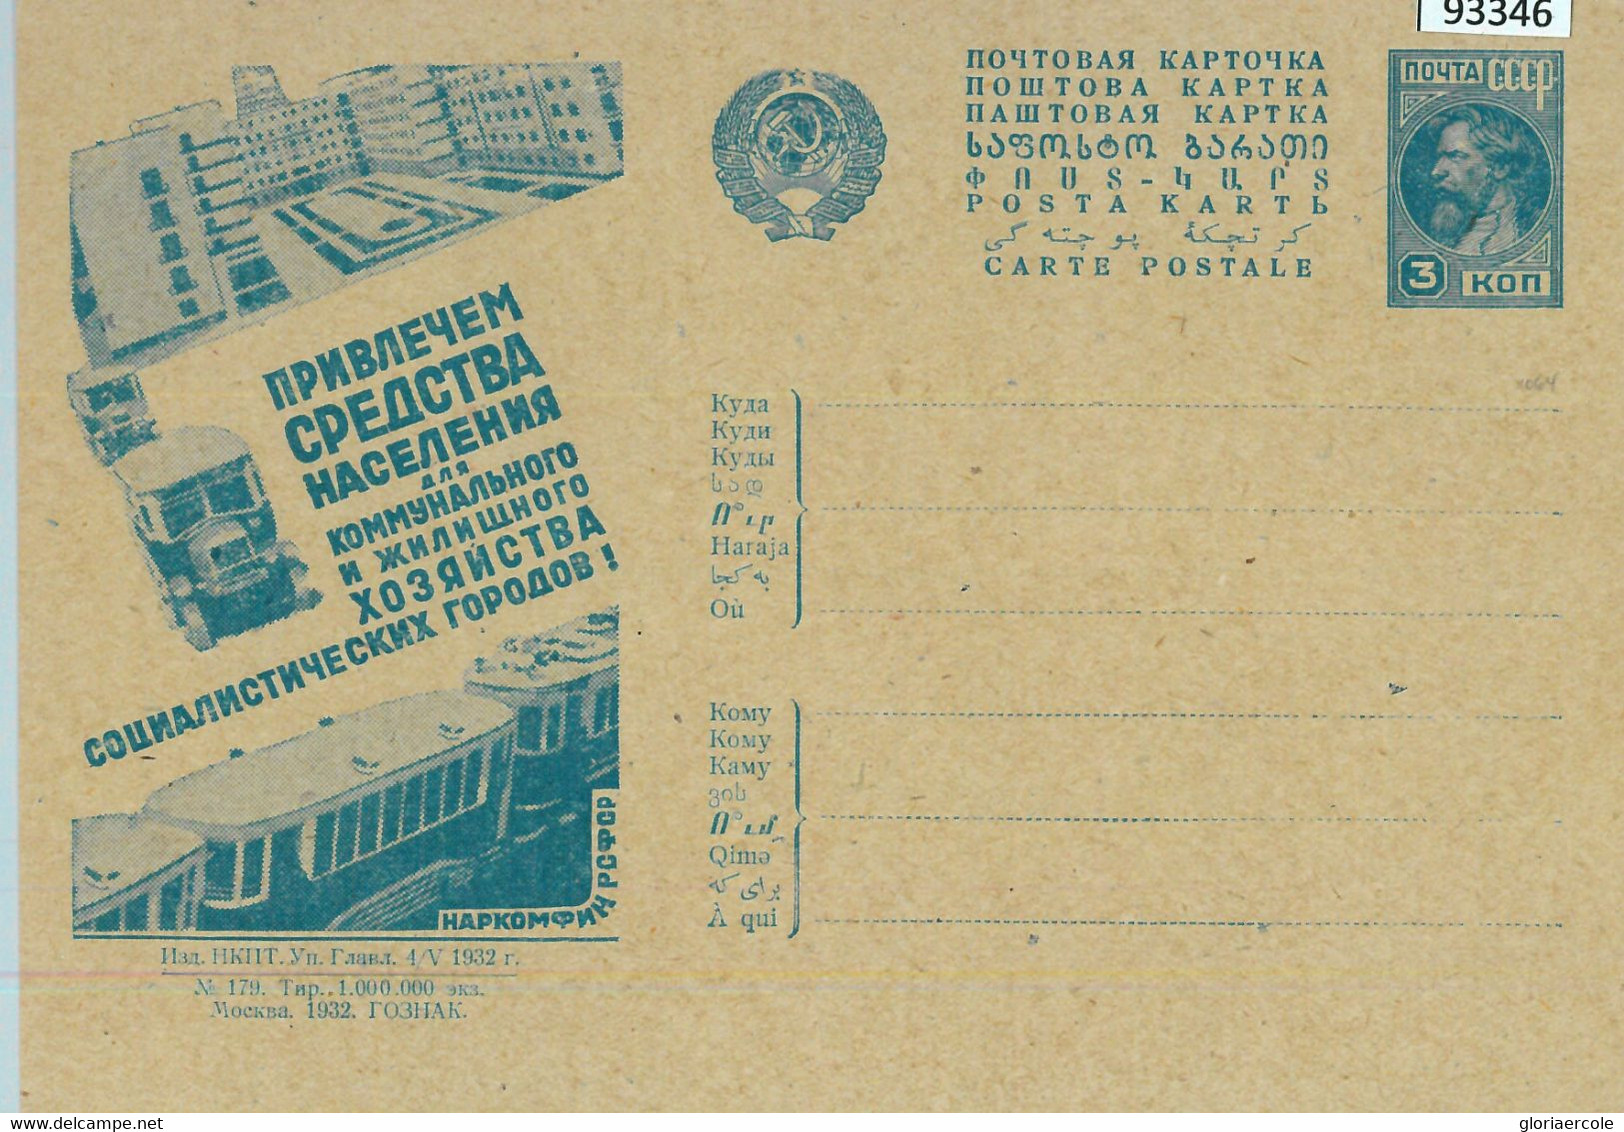 93346  - USSR Russia - POSTAL  STATIONERY COVER  Cars Transport TRAM  1932 - ...-1949